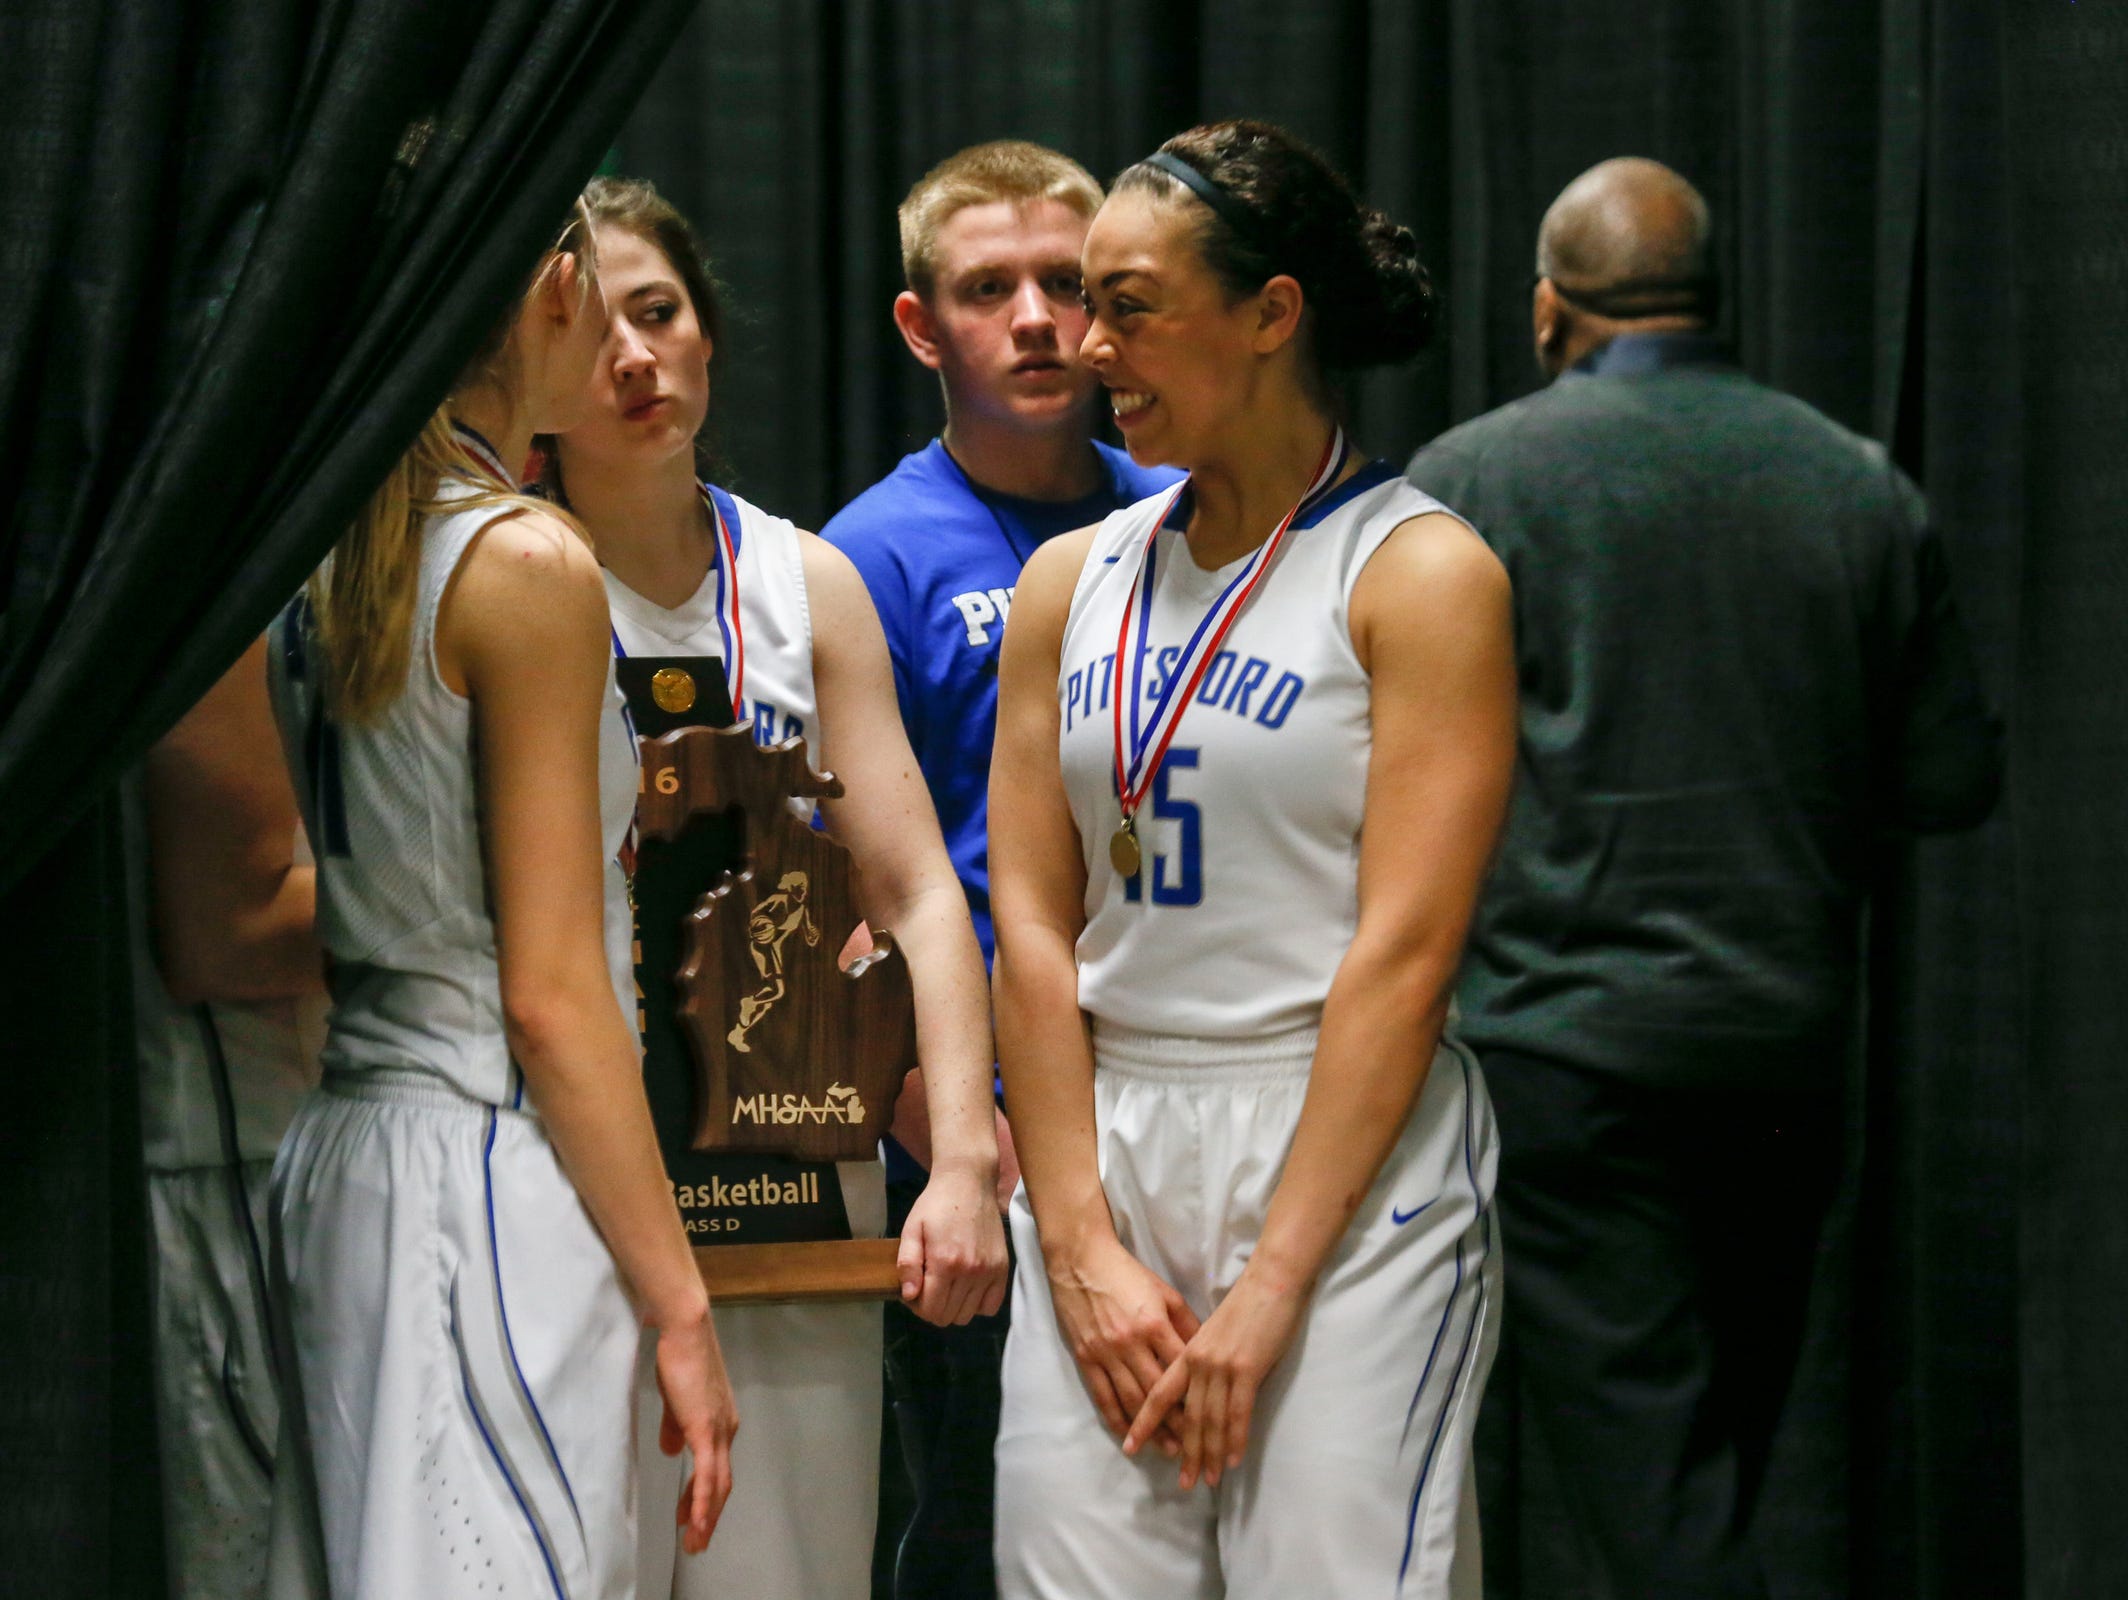 Madison Ayers of the Pittsford Wildcats talks during the press conference after winning the MHSAA girls basketball Class D finals at the Breslin Center in East Lansing on Saturday, March 19, 2016.